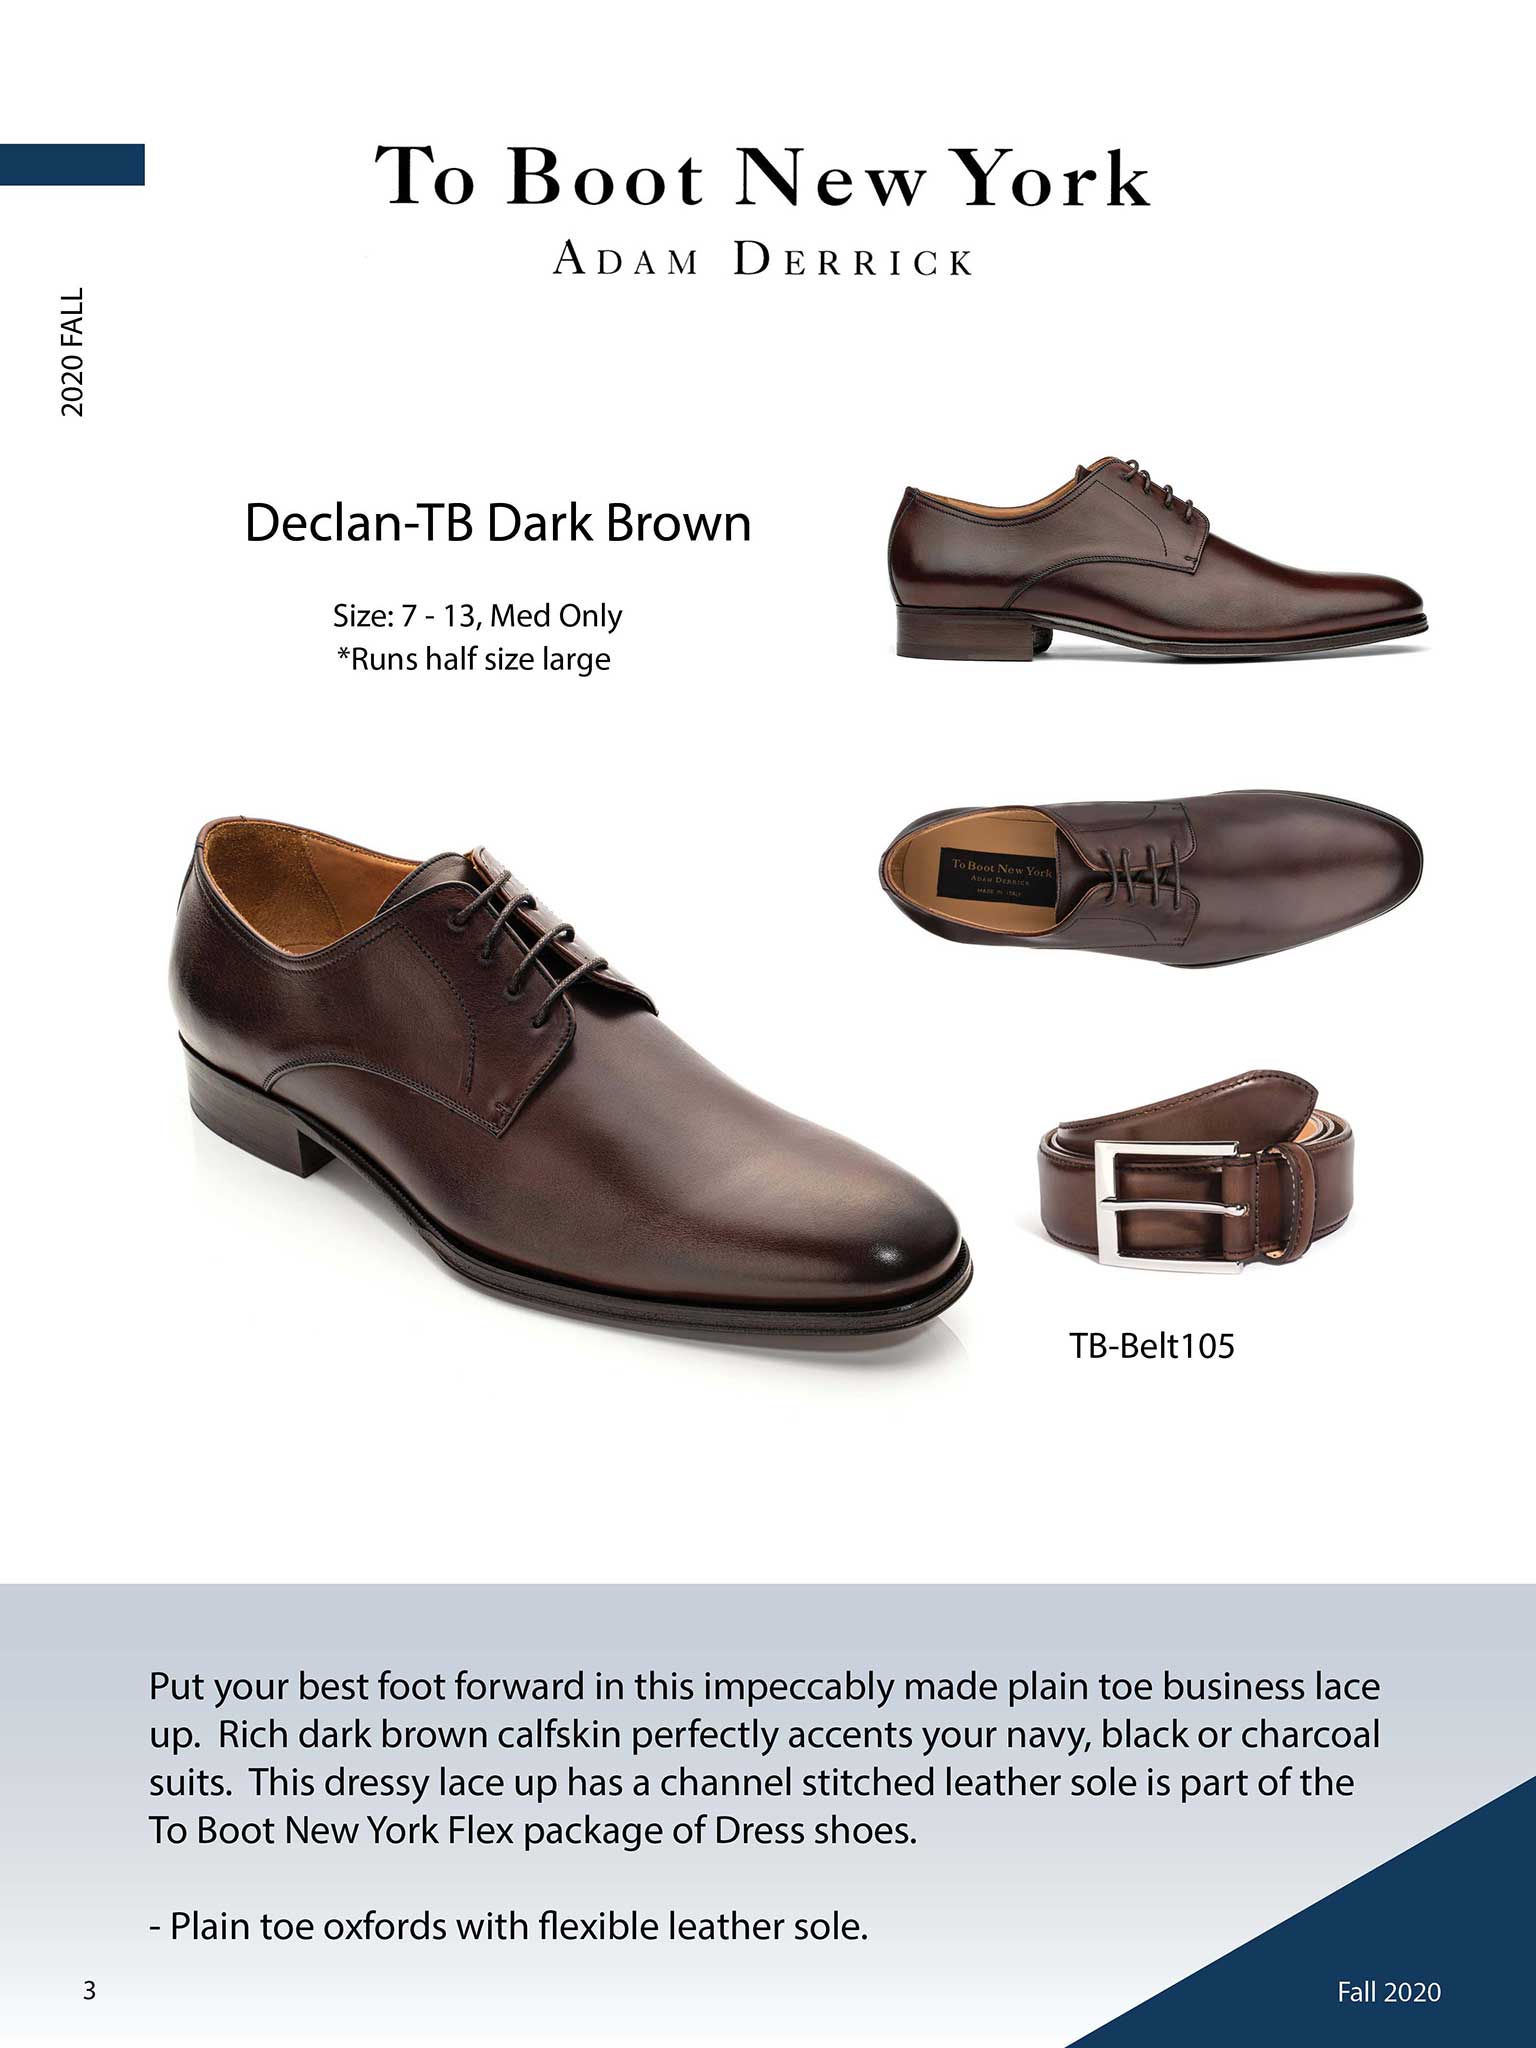 To Boot New York                                                                                                                                                                                                                                          , Declan in Dark Brown by To Boot New York